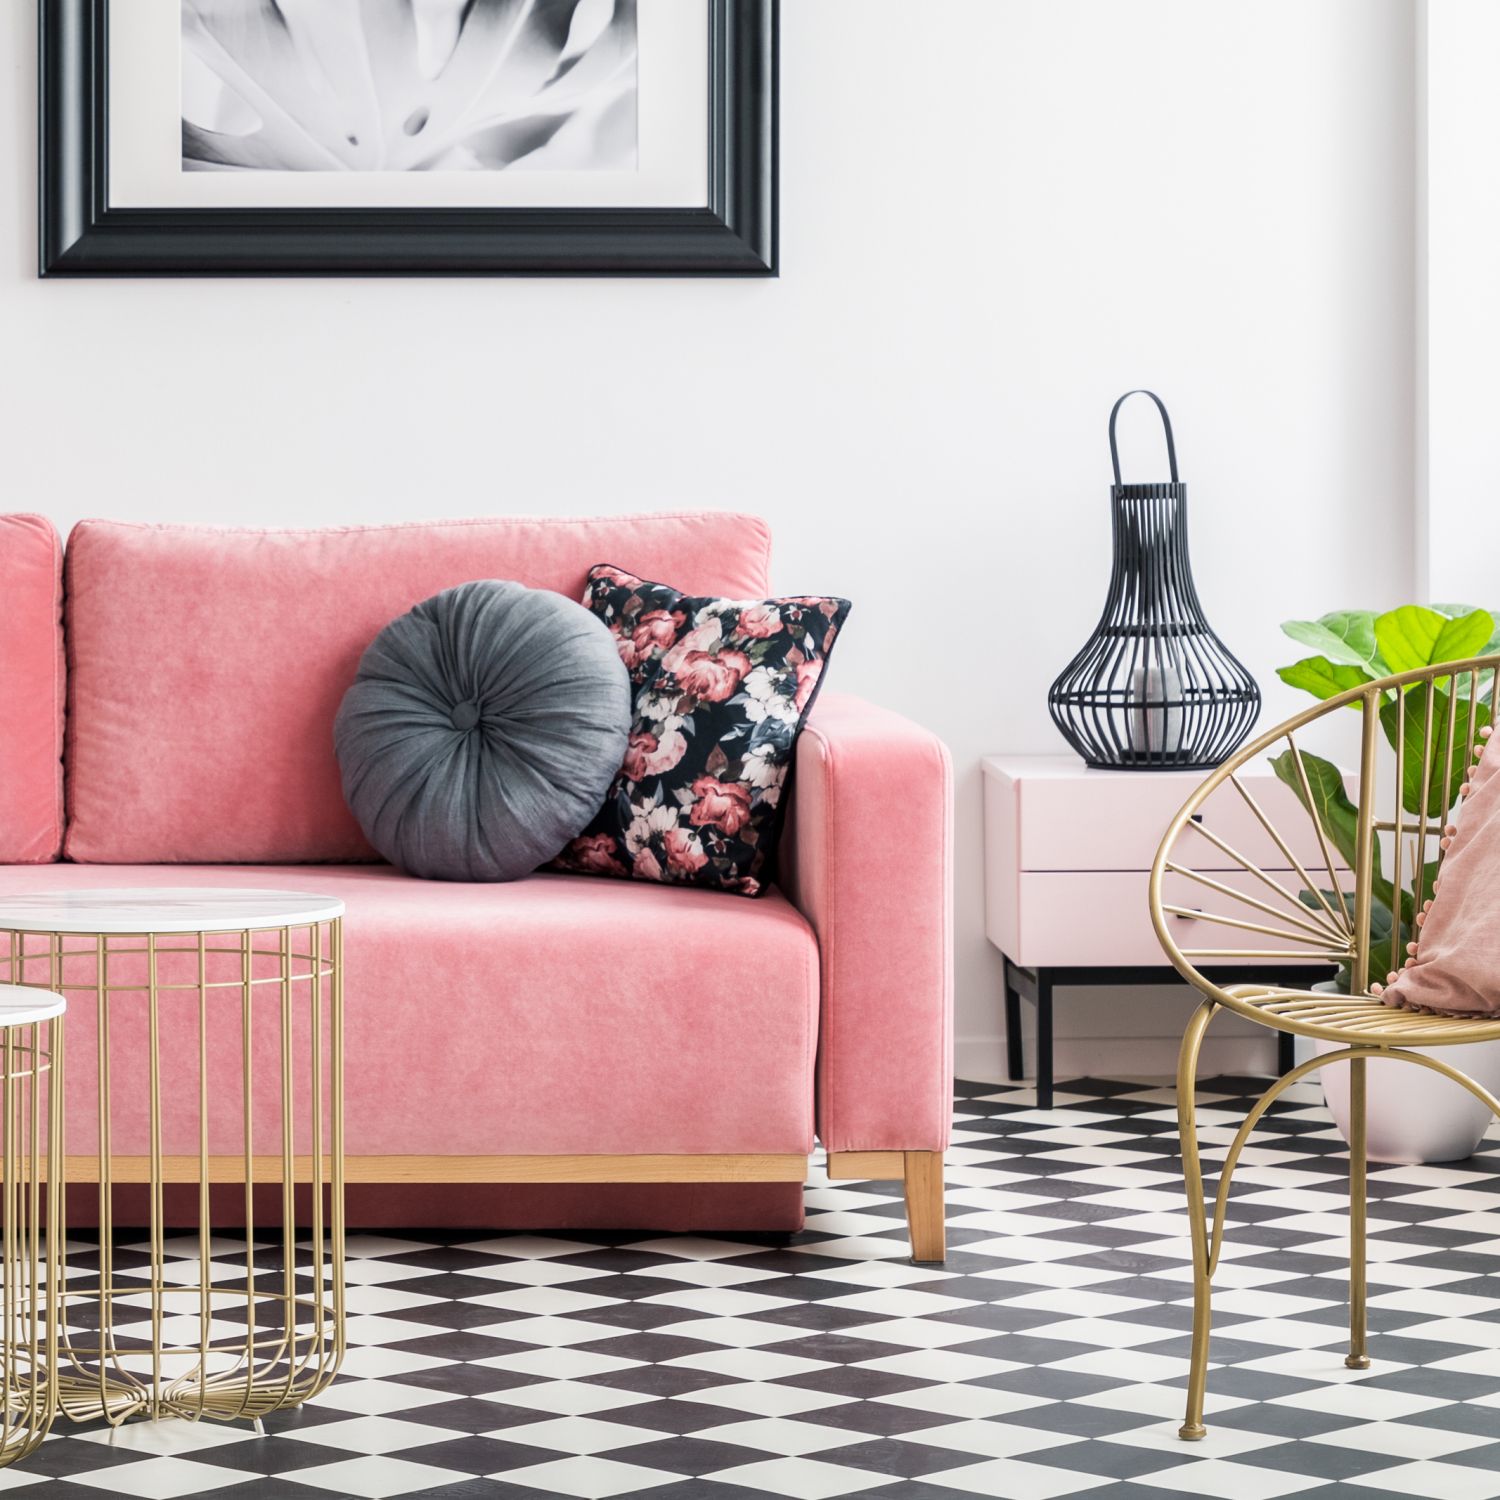 photo of a living room interior with a pink velvet sofa golden armchair and tables with decorative lights and plants with a wall painting and checkered tile floor